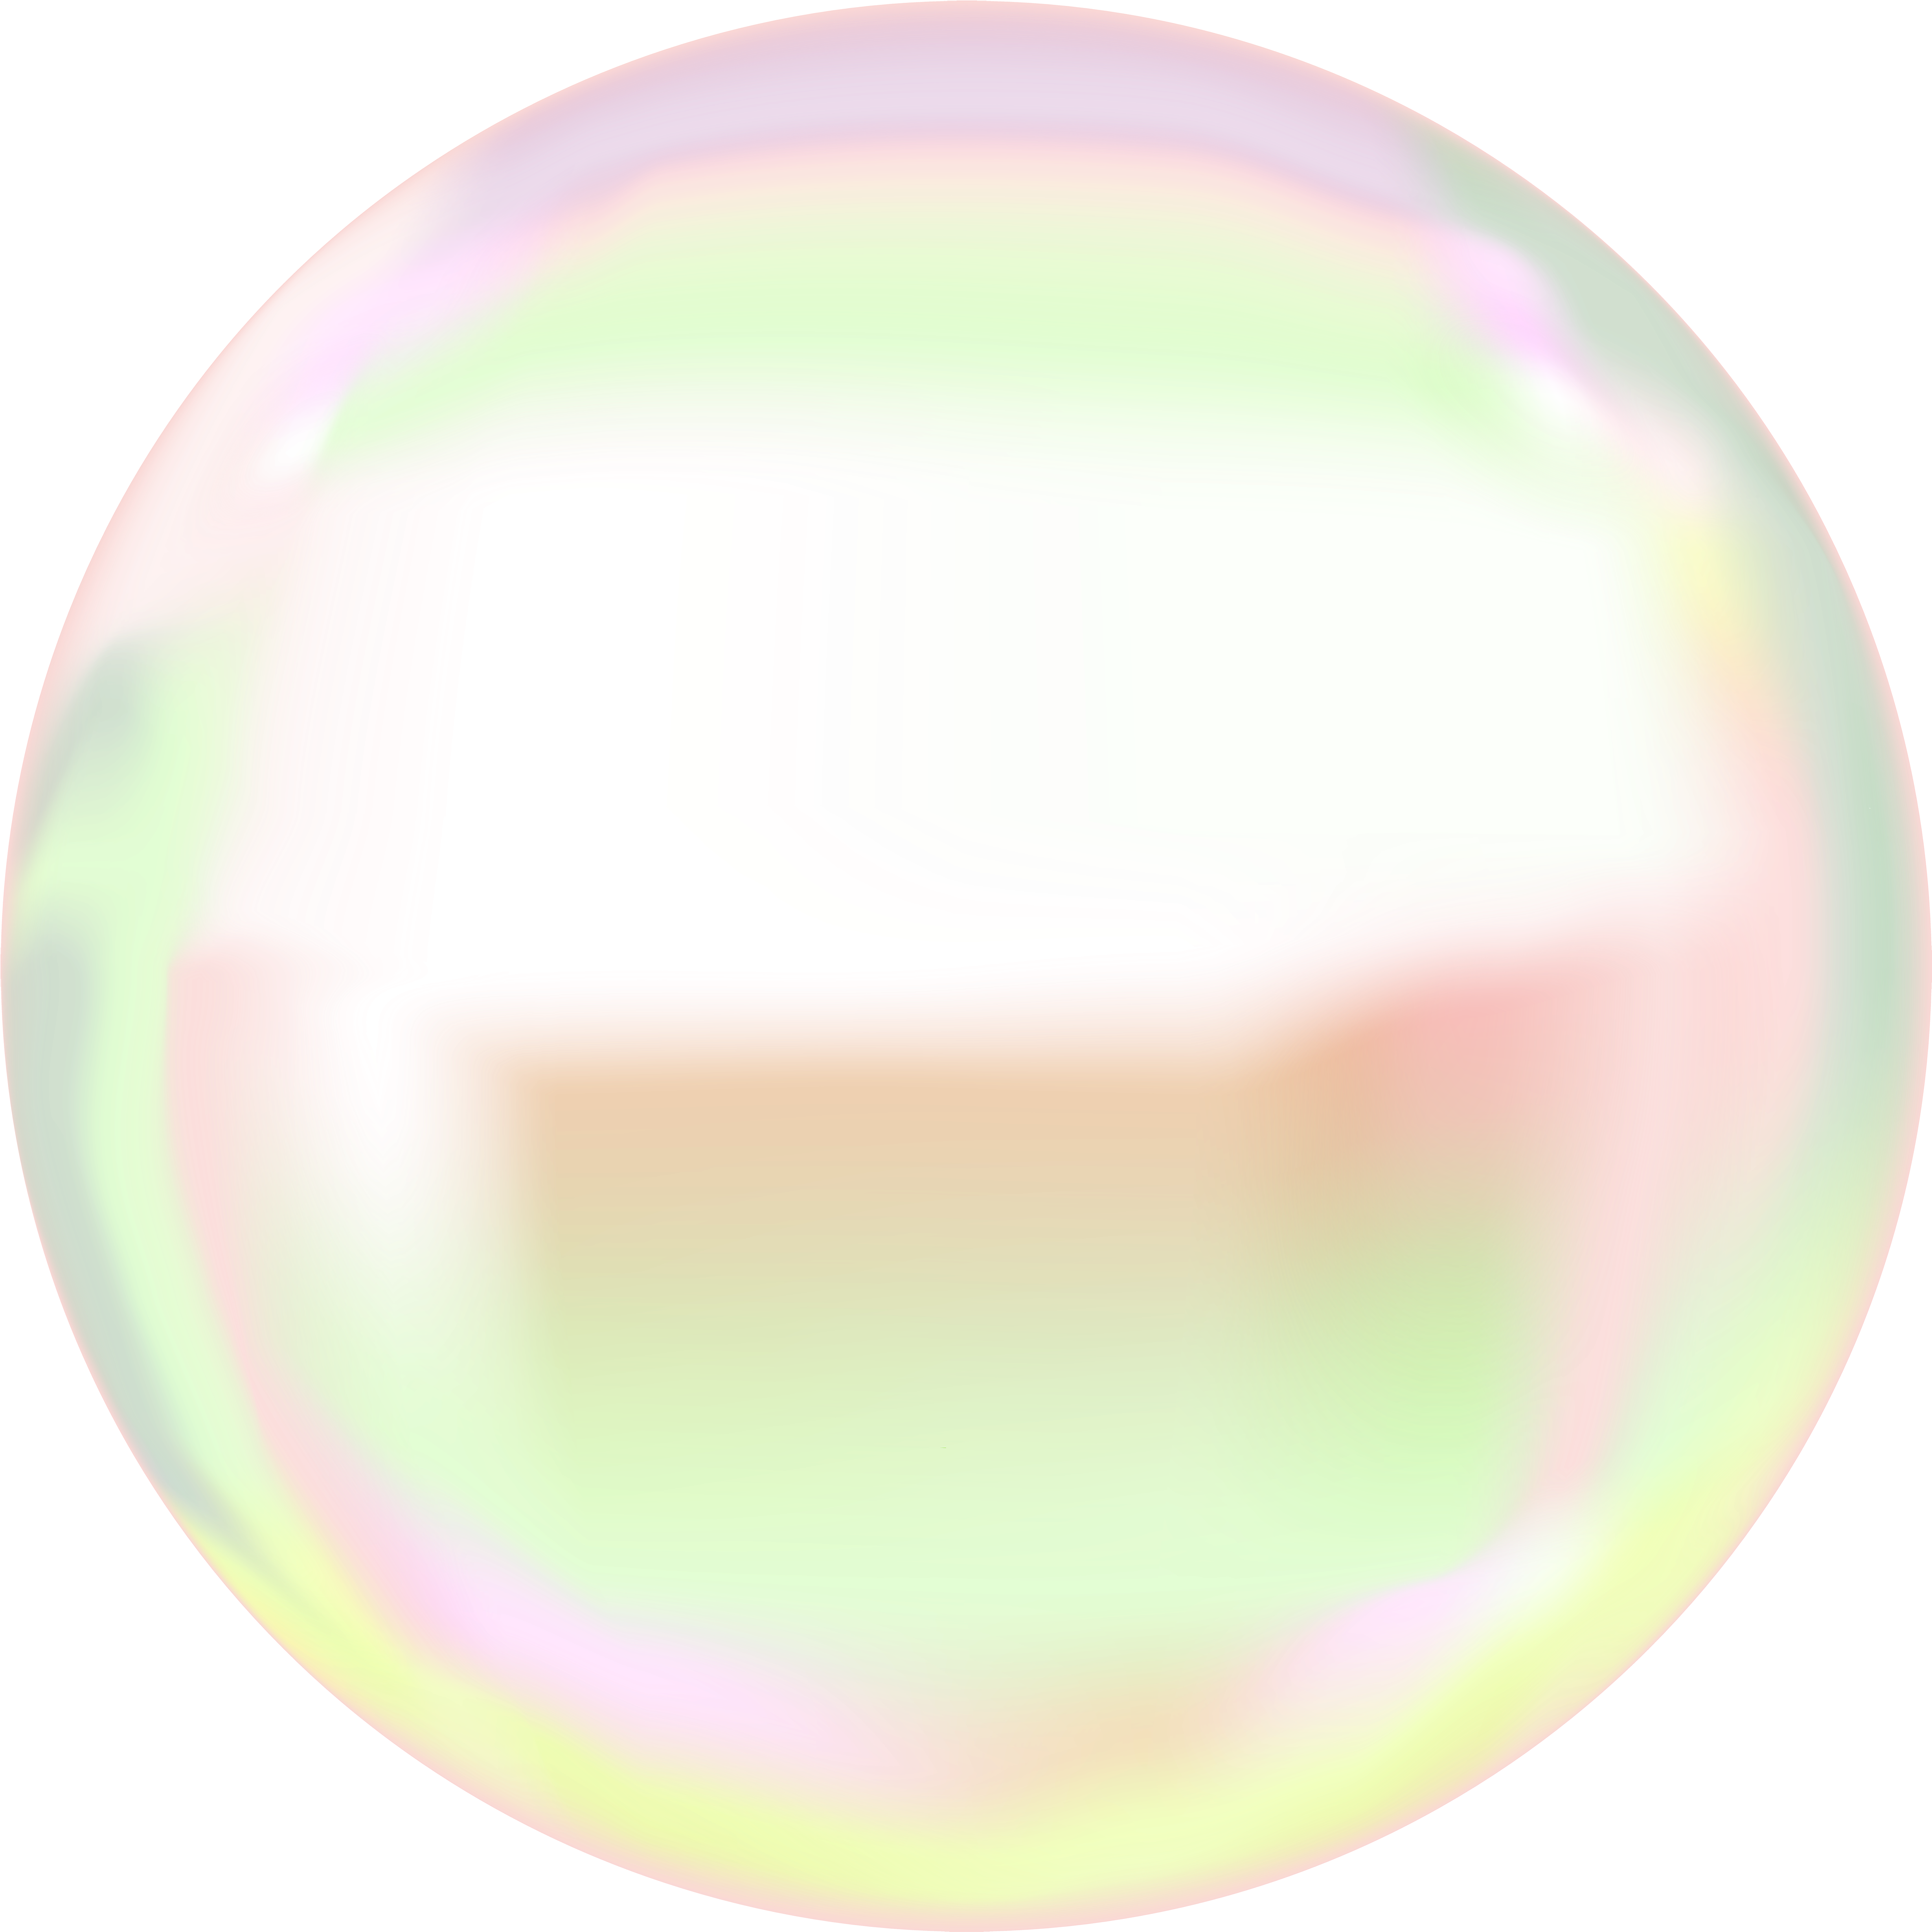 Download Transparent Bubble Png Clip Art Image - Transparent Background  Bubble Png Transparent PNG Image with No Background 